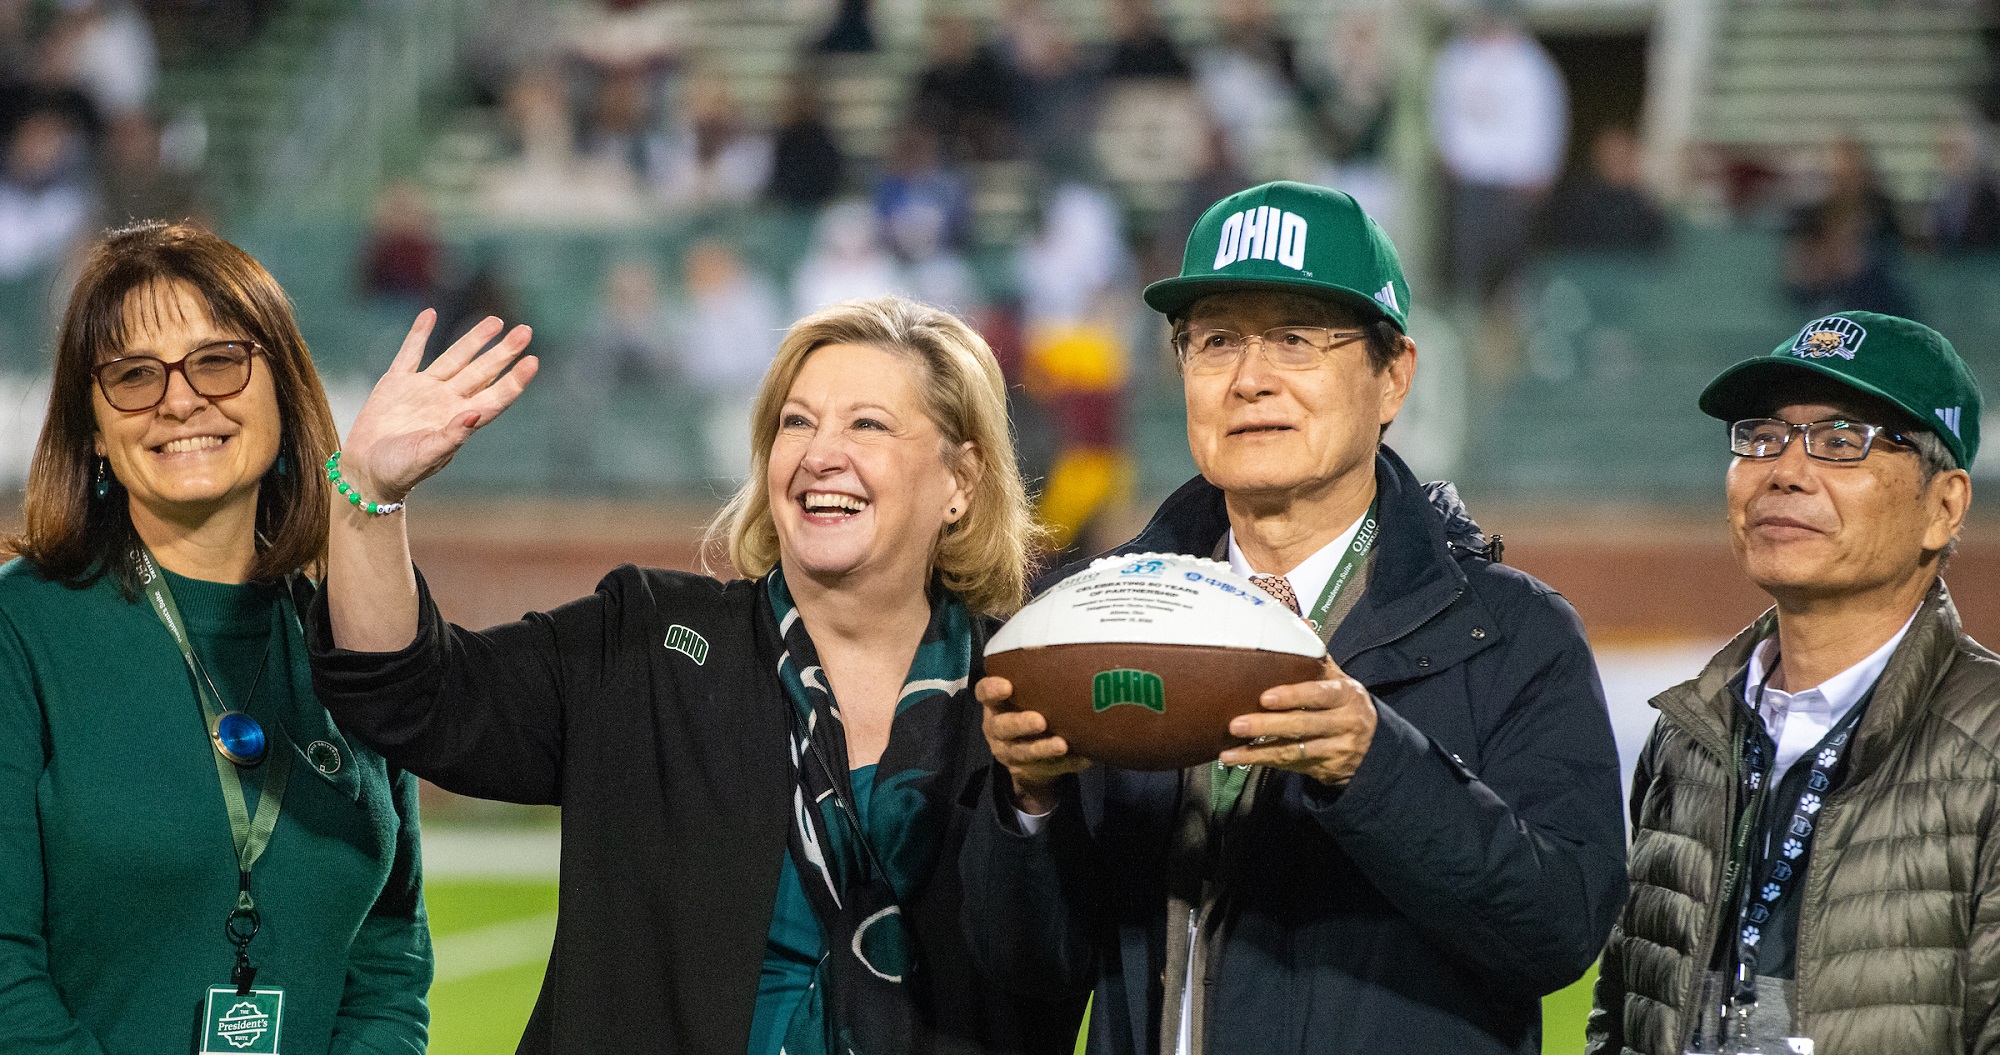 OHIO and Chubu officials are shown while being recognized on the field during the football game in Peden Stadium.